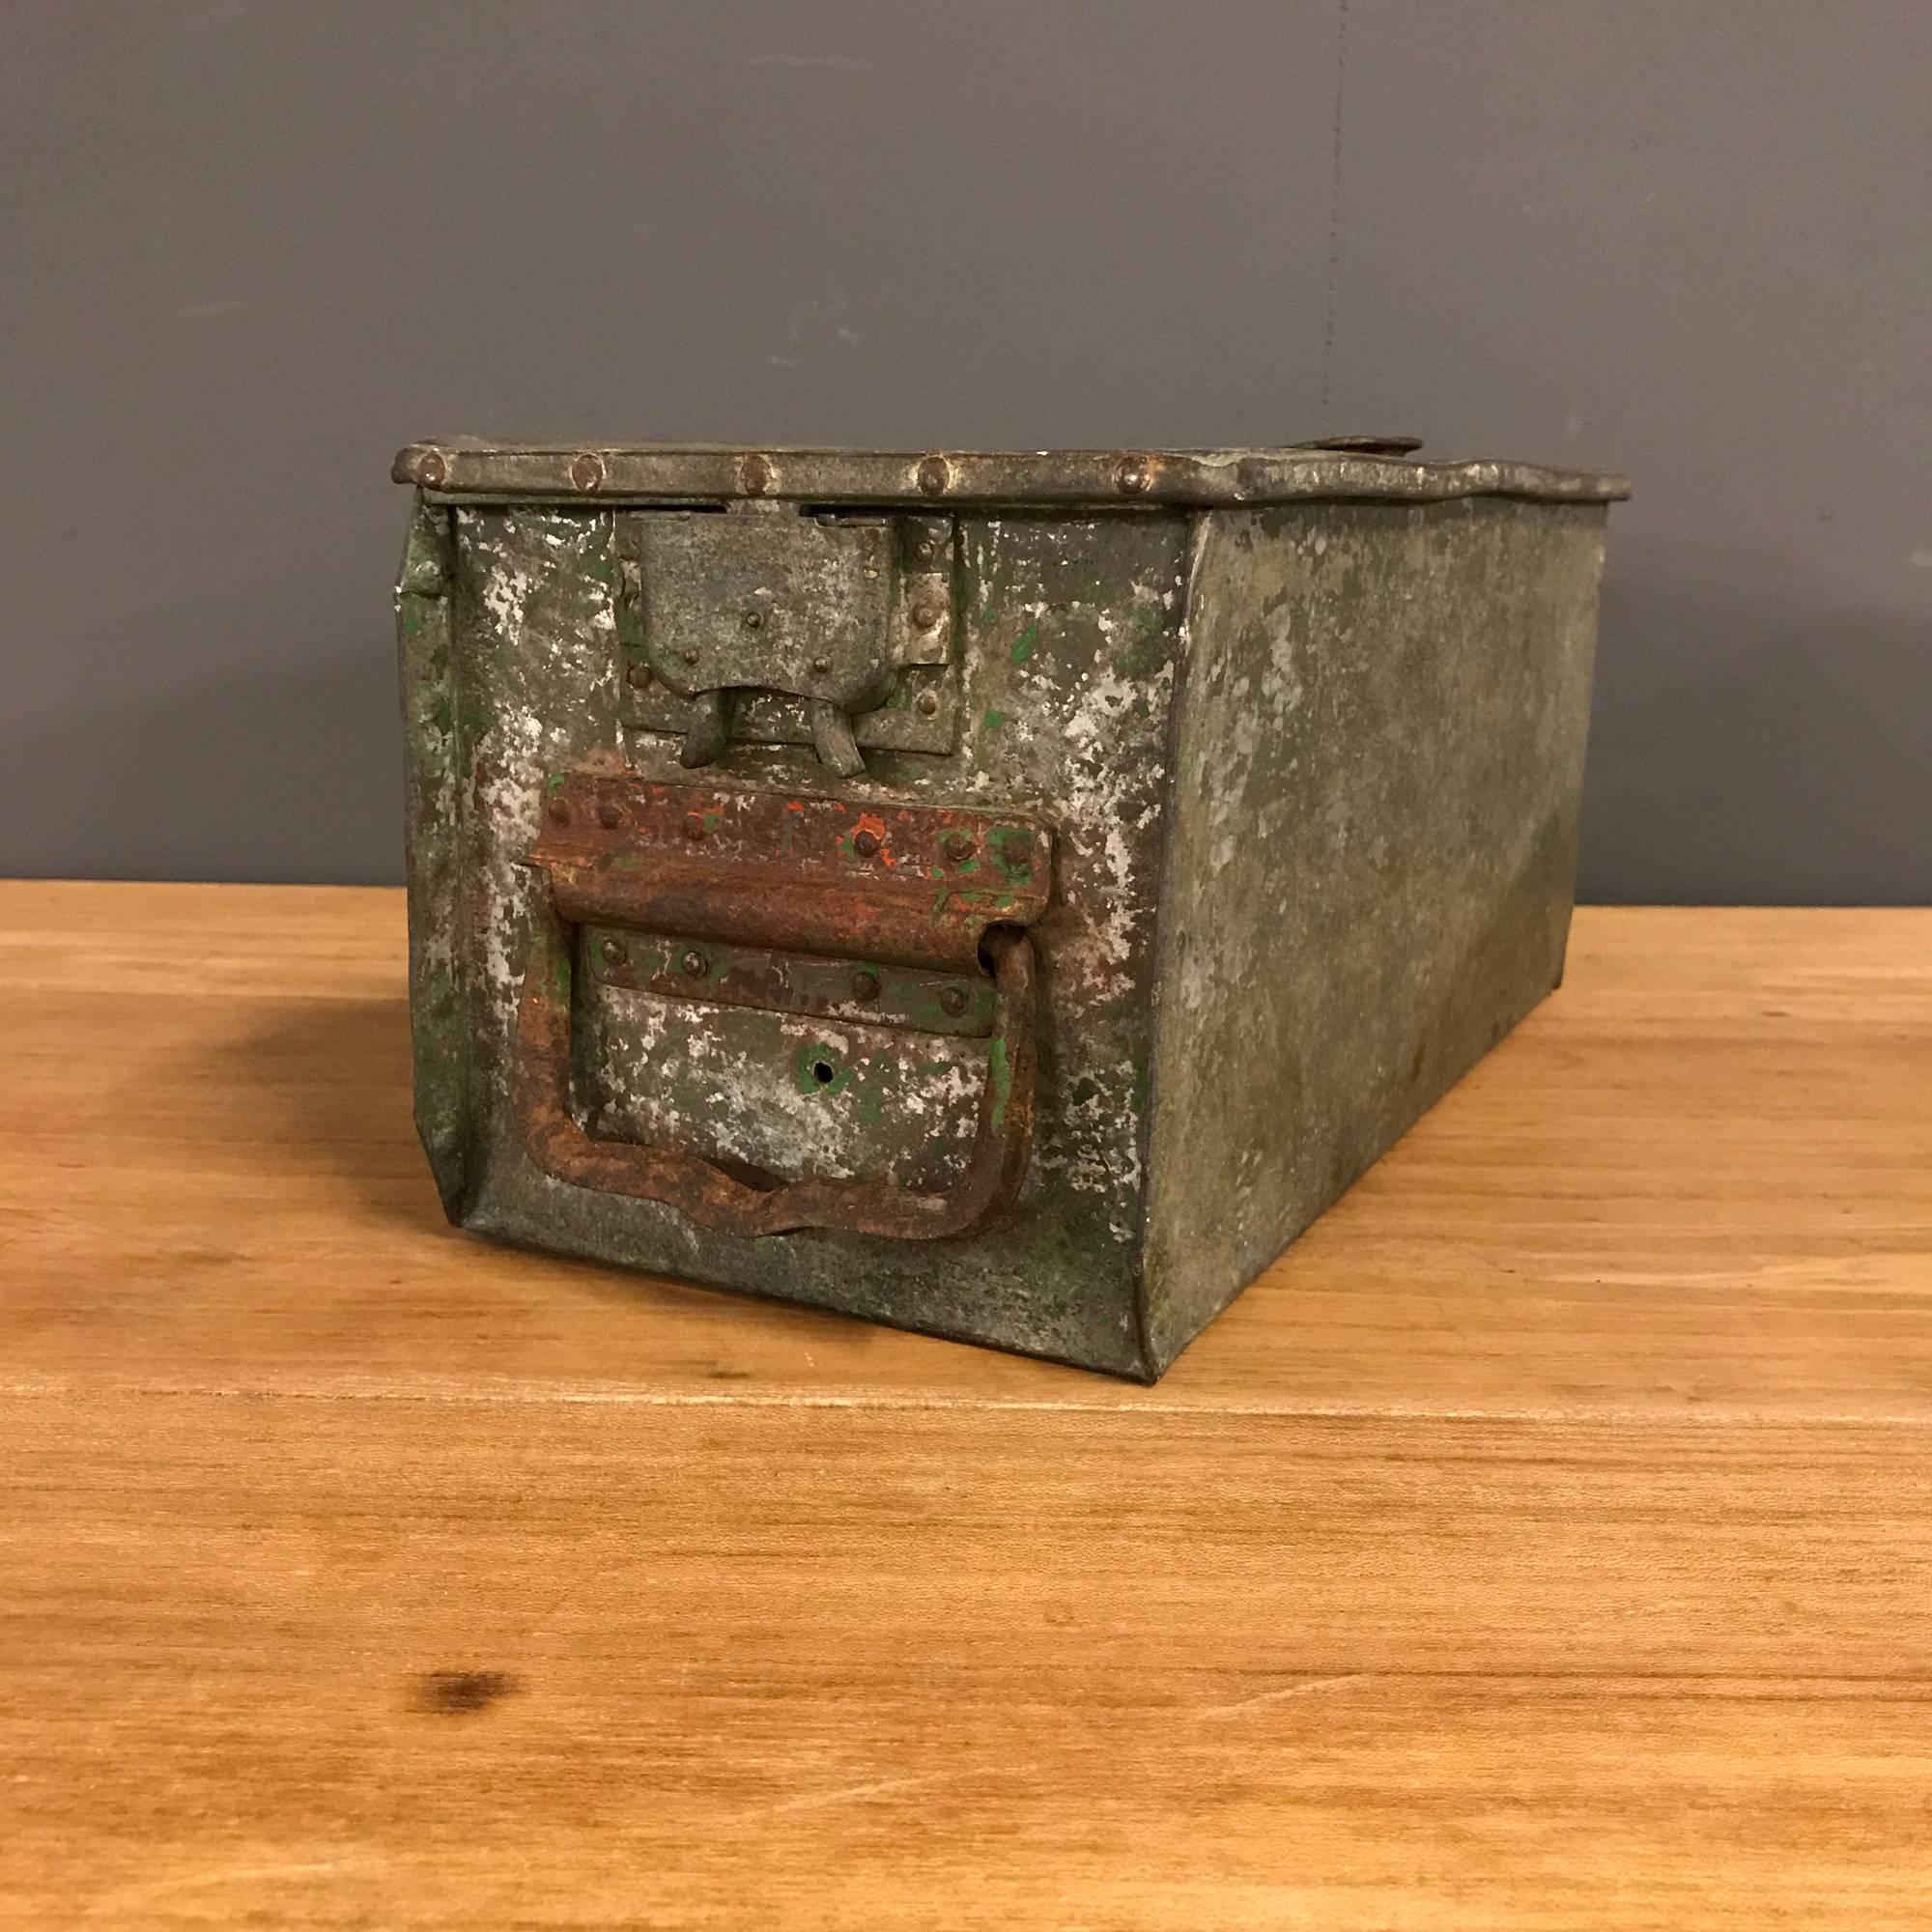 Ammo box WWI German Machine Gun 08. Both have original distressed paint and remain in good condition. The locks are in working order. Two items available.